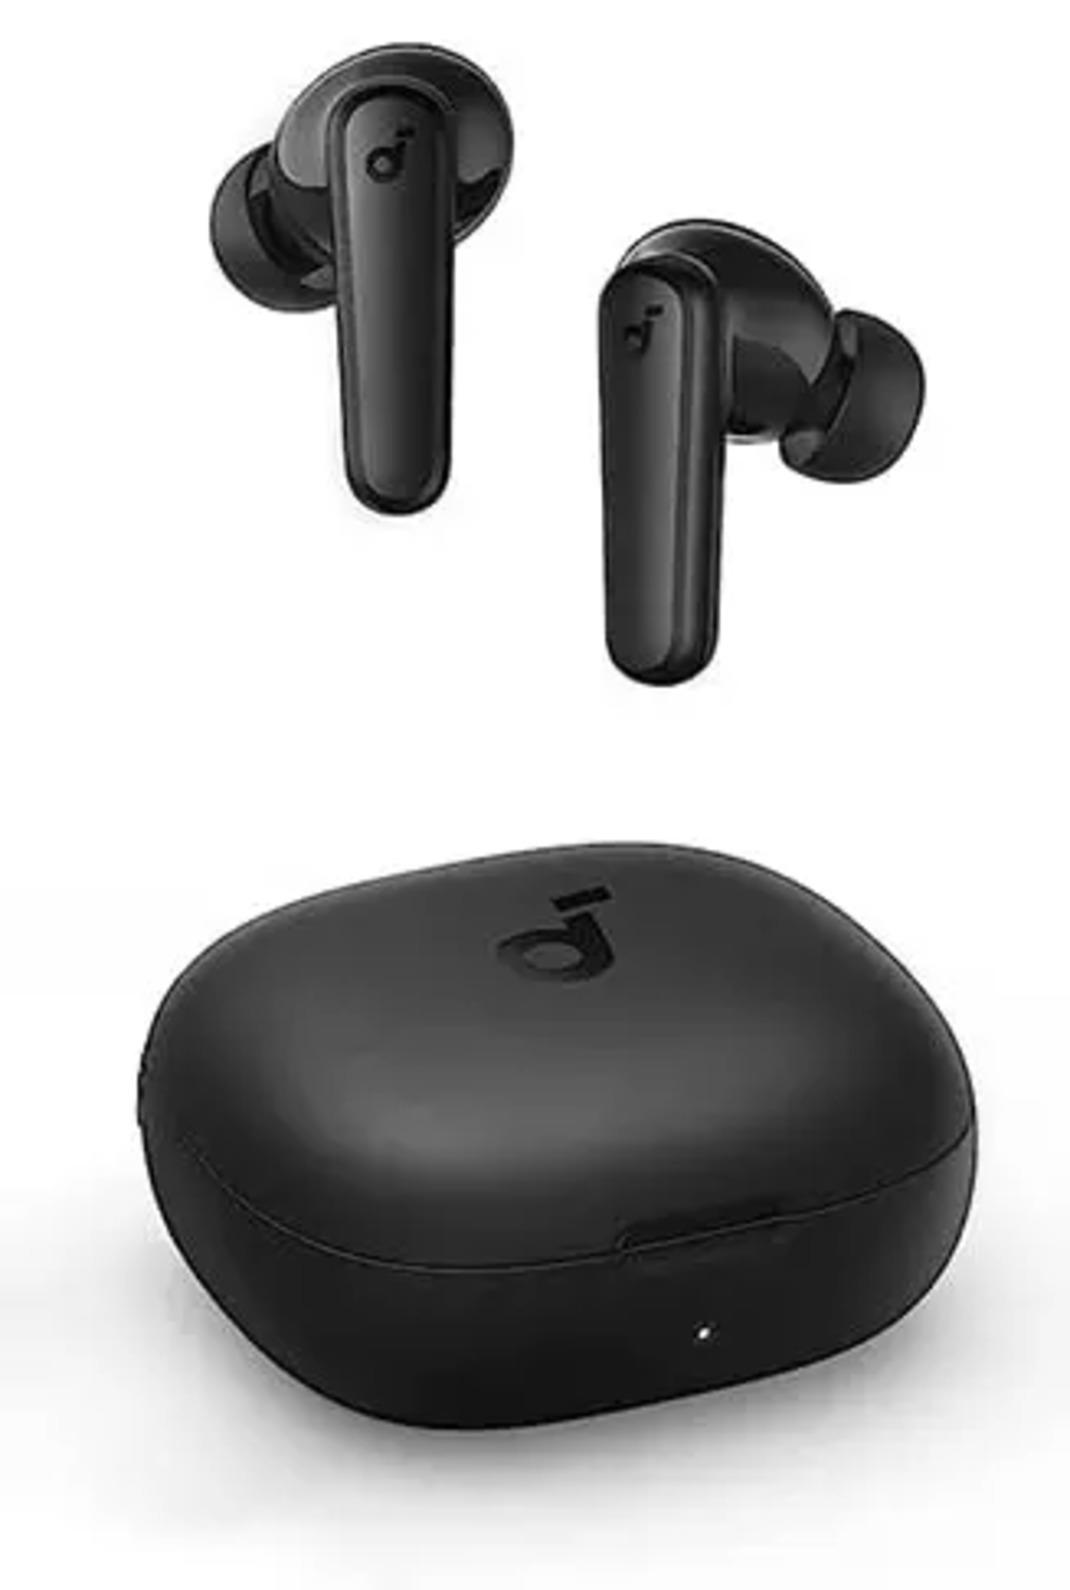 Compare Anker Soundcore R50i True Wireless In-Ear Earbuds (TWS), IPX5-Water  Resistant (Black) vs OPPO Enco X2 with Active Noise Cancellation, Triple  Mic for Better Calls, Coaxial Dual-Driver for Deep bass Bluetooth Headset  (Black) - Anker